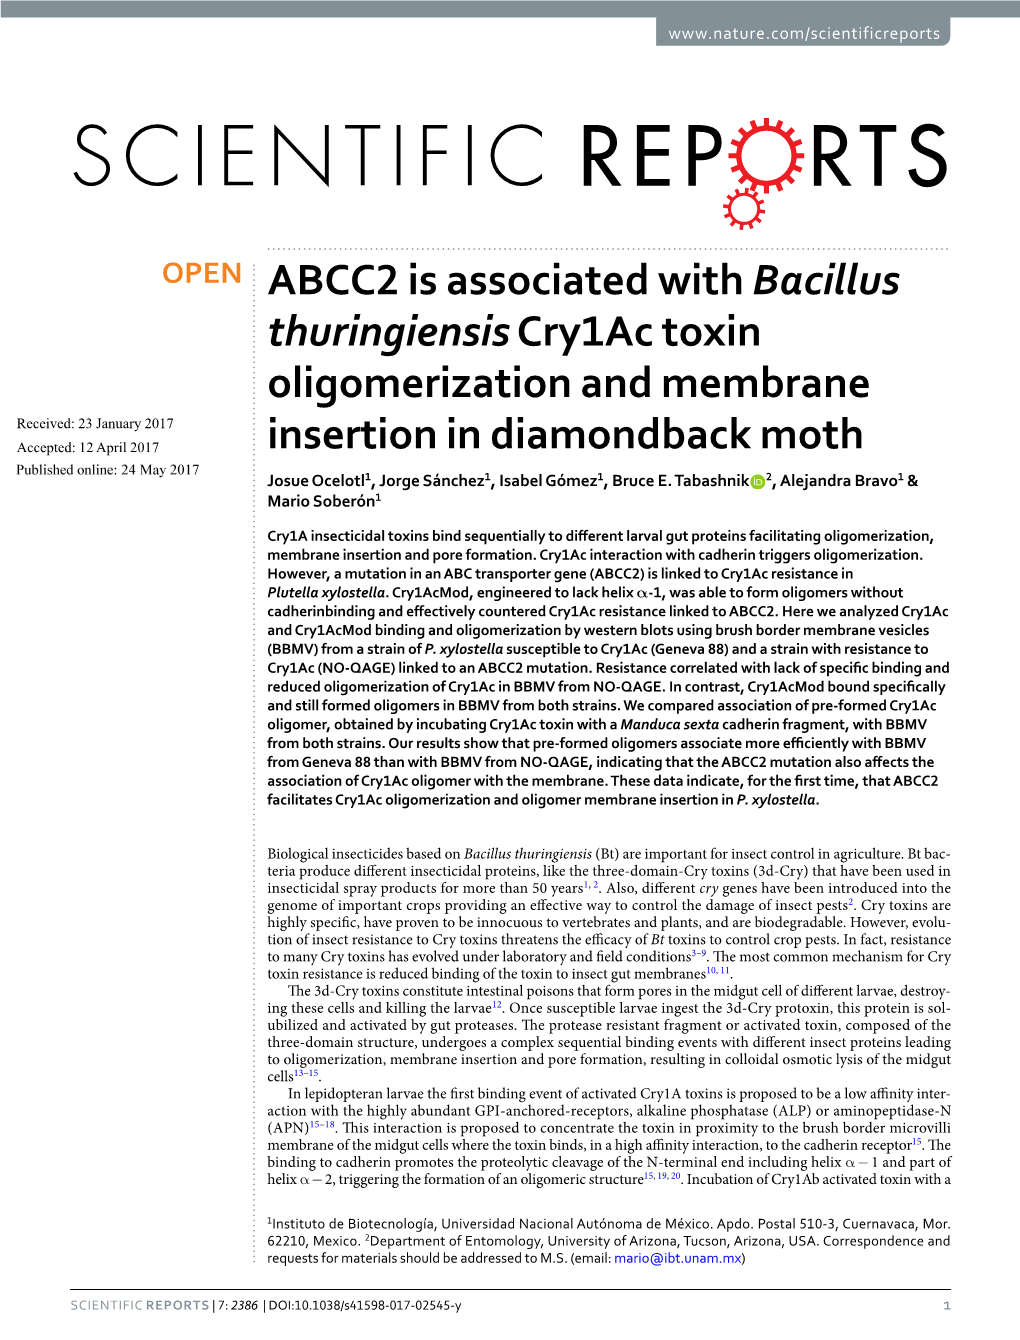 ABCC2 Is Associated with Bacillus Thuringiensis Cry1ac Toxin